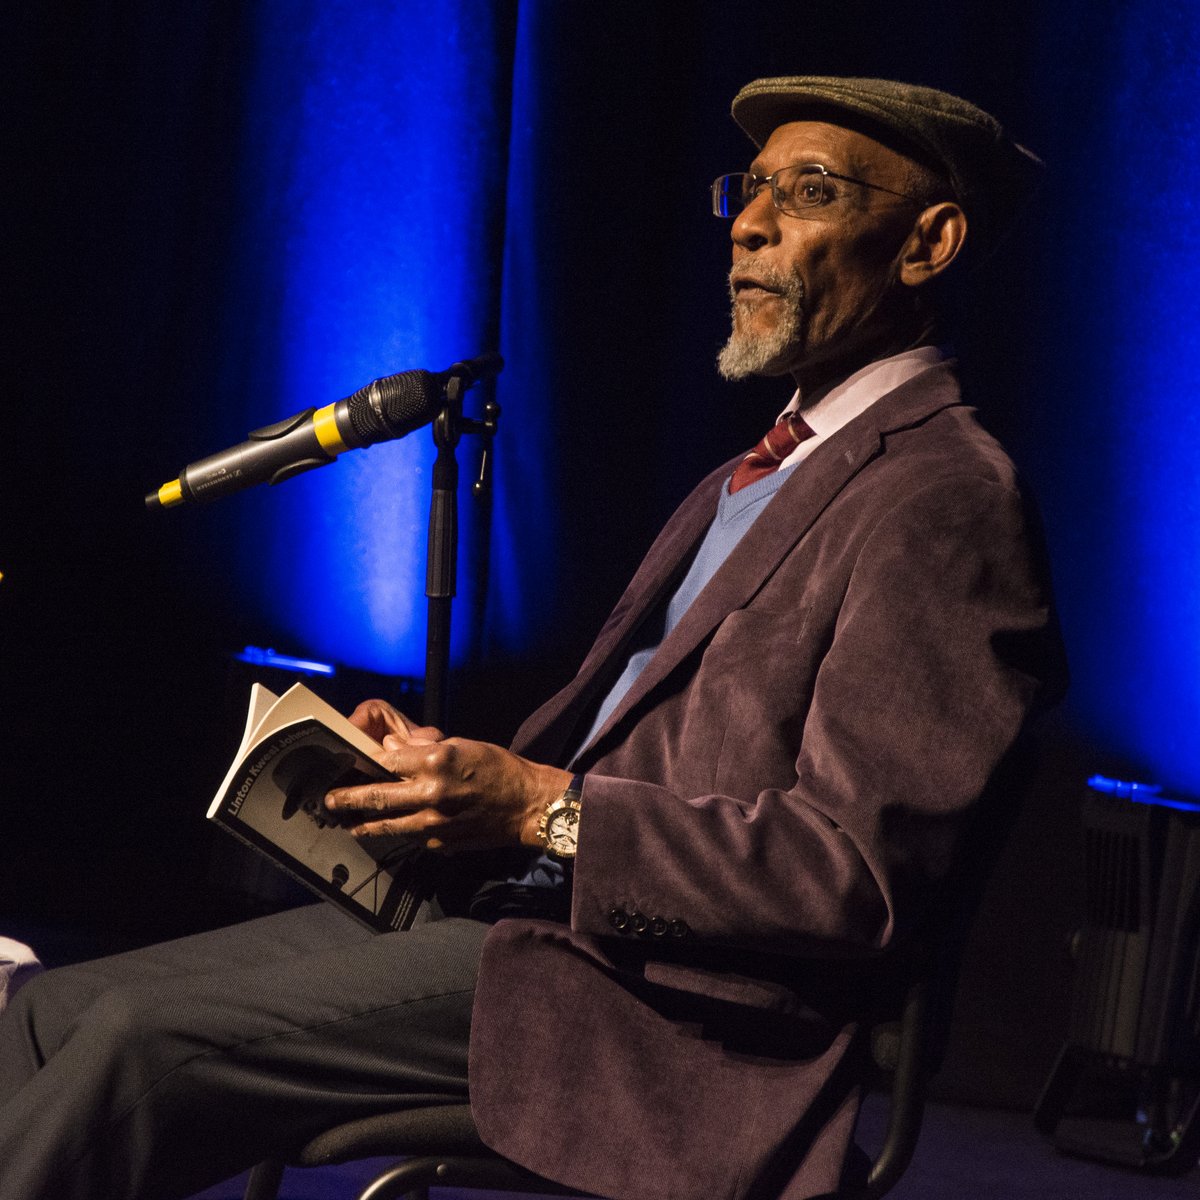 Linton Kwesi Johnson on the main stage at the Byre Theatre bringing this years #stanza2023 to a close......@StAnzaPoetry #poetryfestival #poetry